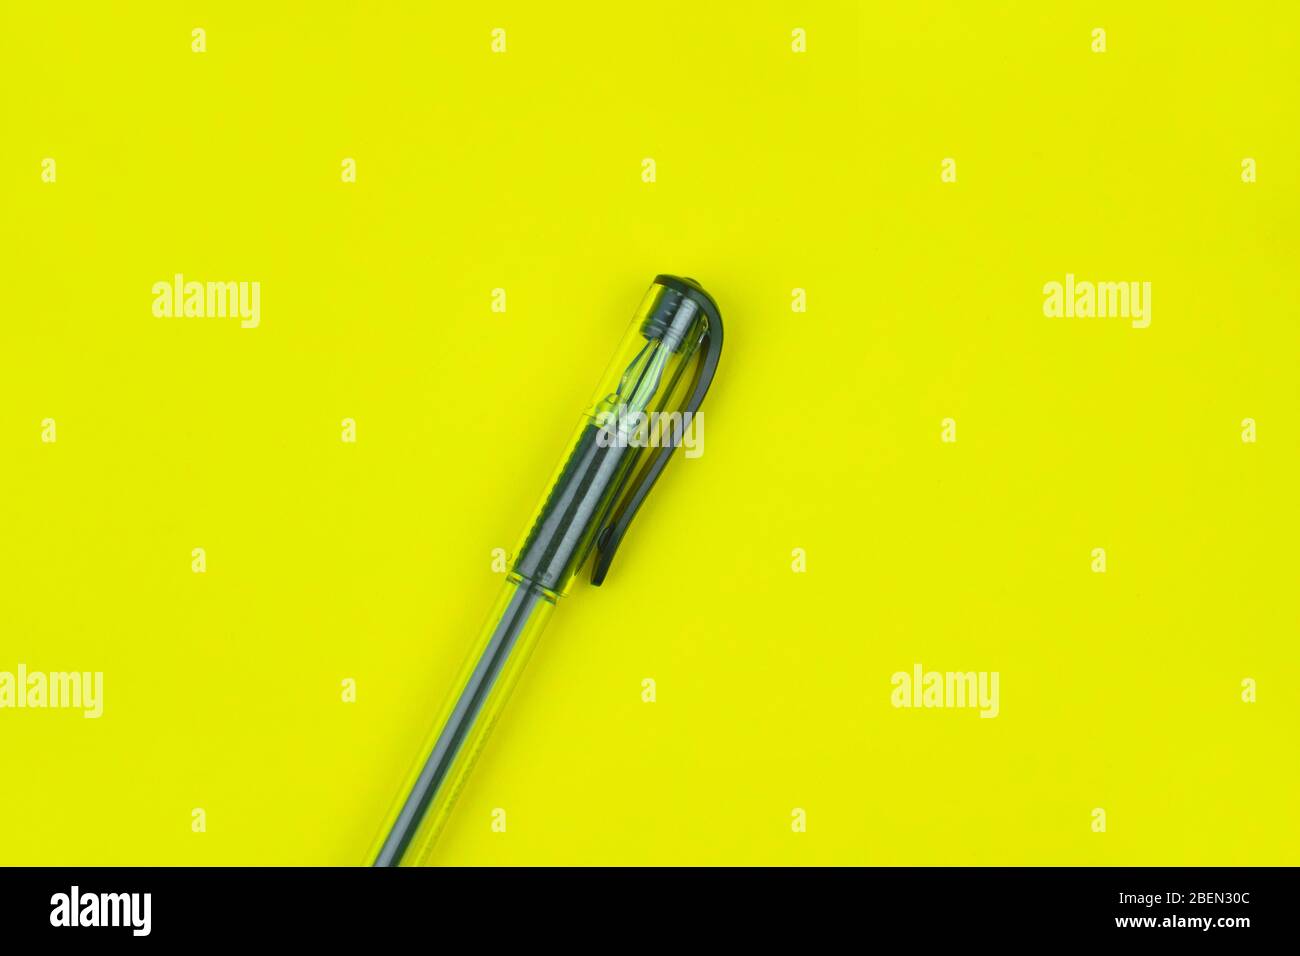 Black colored ball point pen placed over a bright yellow colored empty paper background Stock Photo